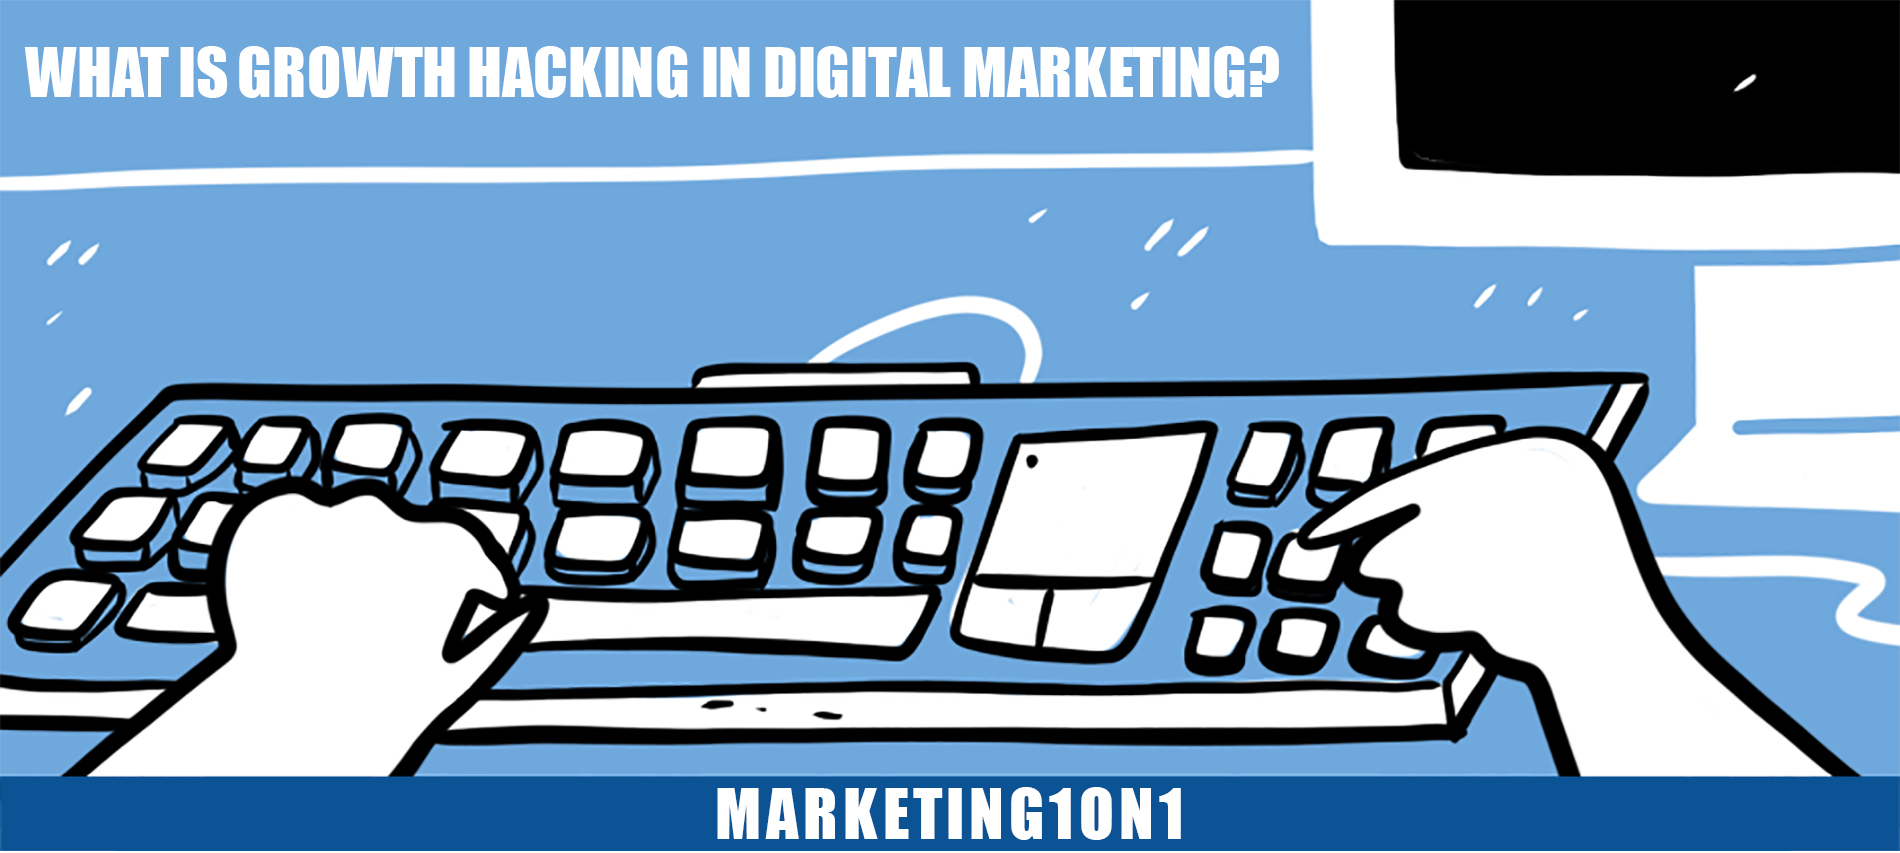 What is growth hacking in digital marketing?